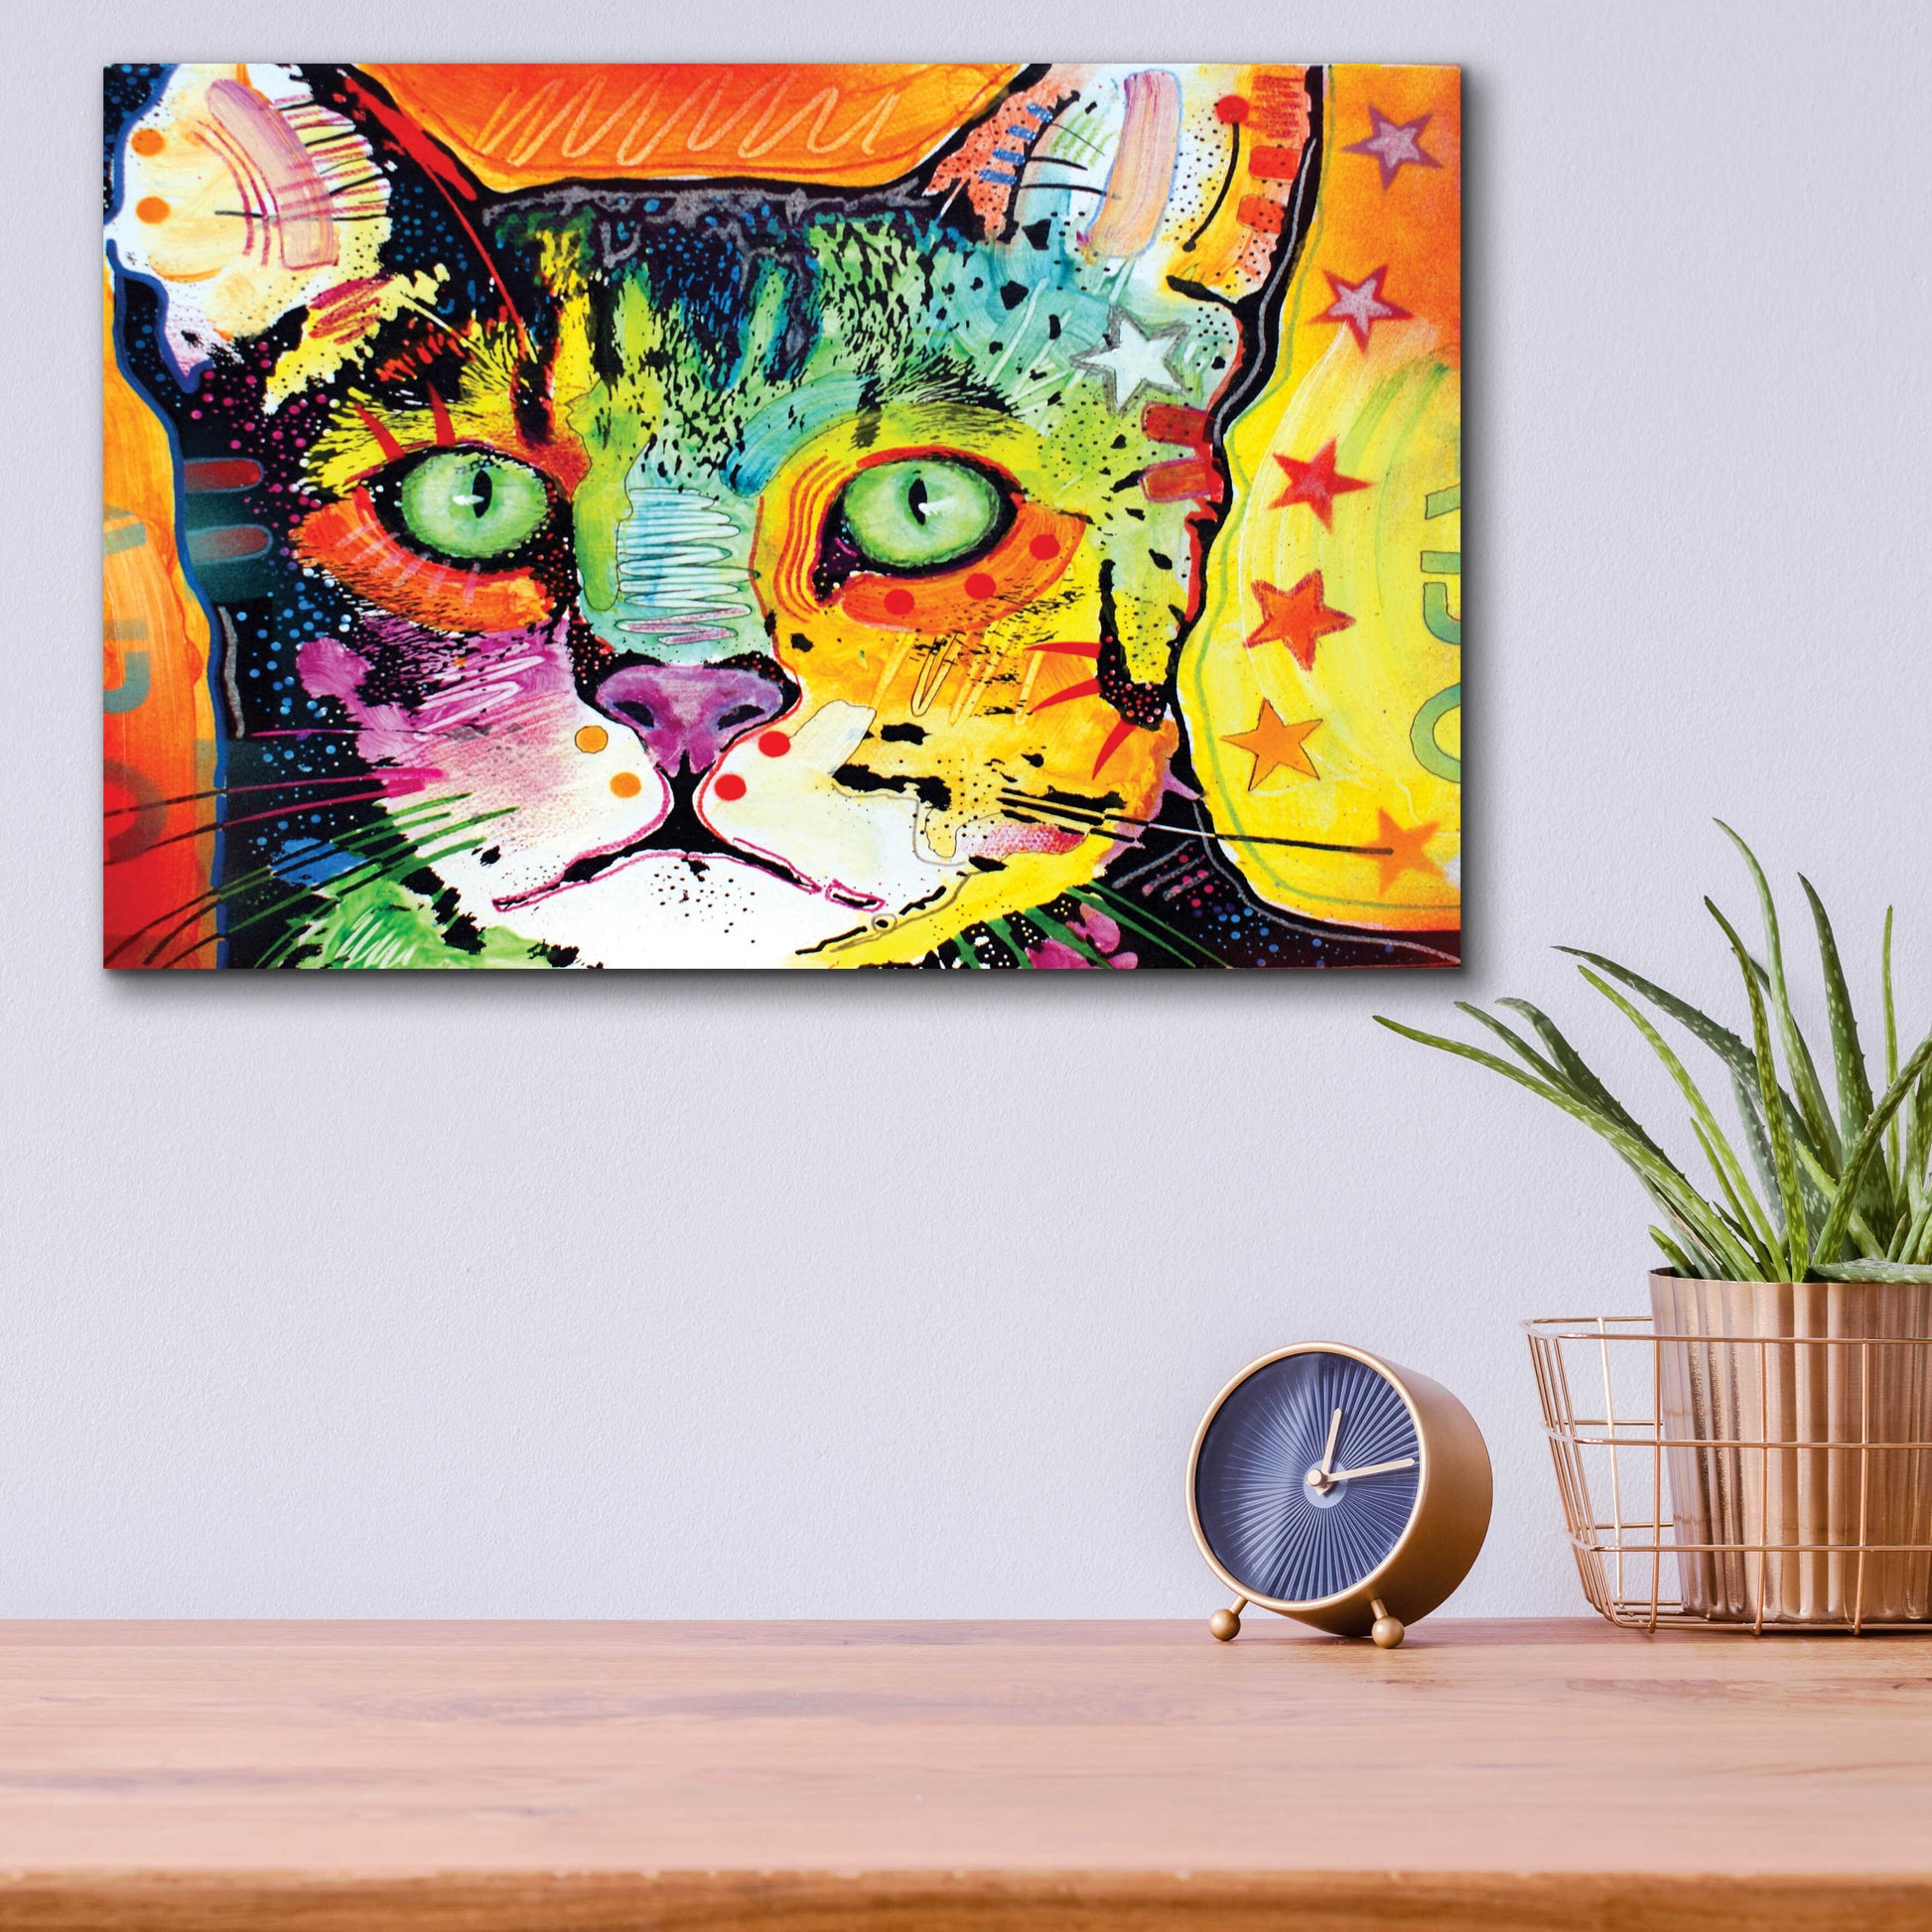 Epic Art 'Straight Cat' by Dean Russo, Acrylic Glass Wall Art,16x12